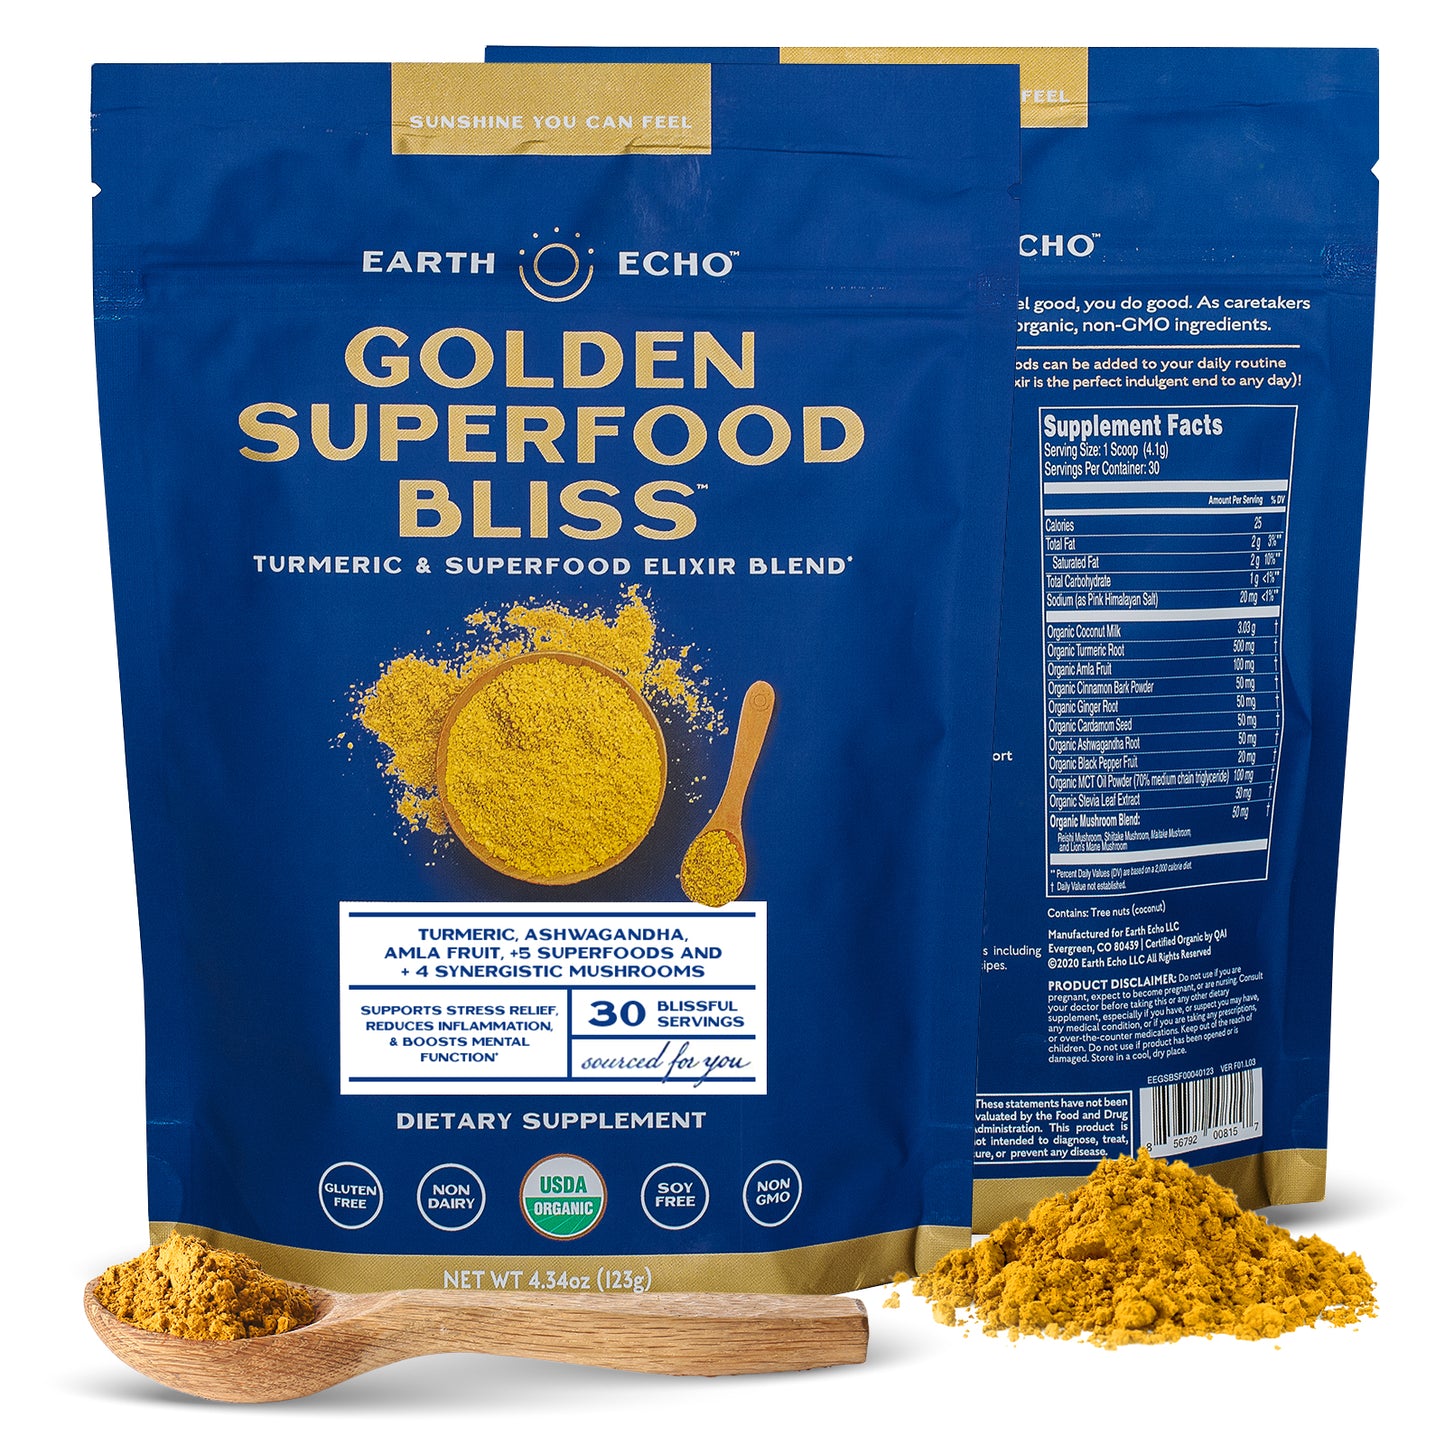 Buy One Get One FREE: Golden Superfood Bliss